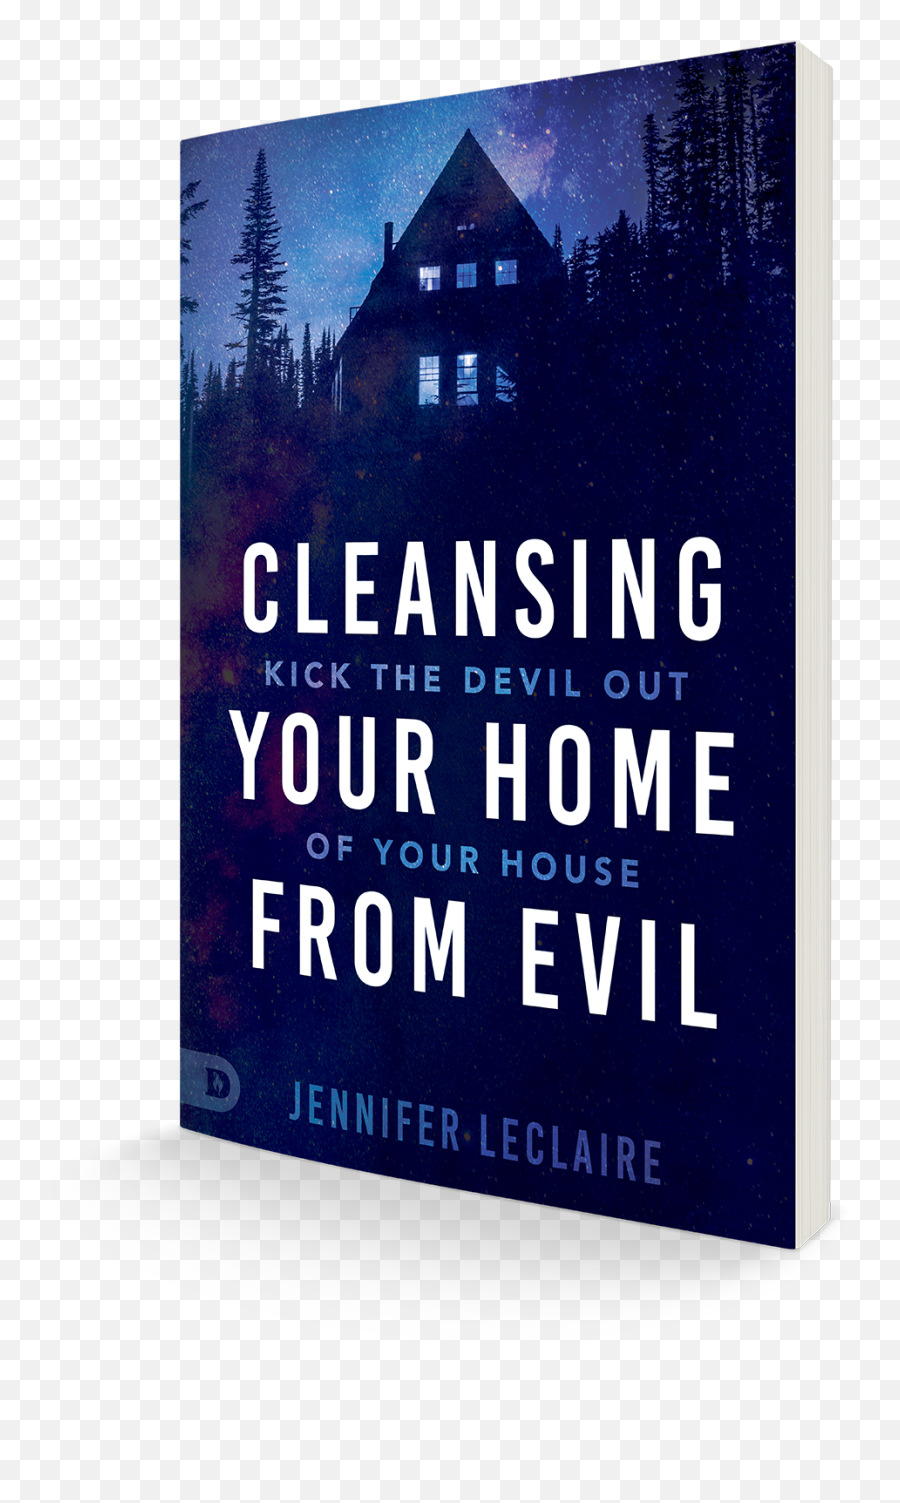 Cleansing Your Home From Evil Kick The Devil Out Of Your House Paperback U2013 August 17 2021 Emoji,Books For Ells About Emotion